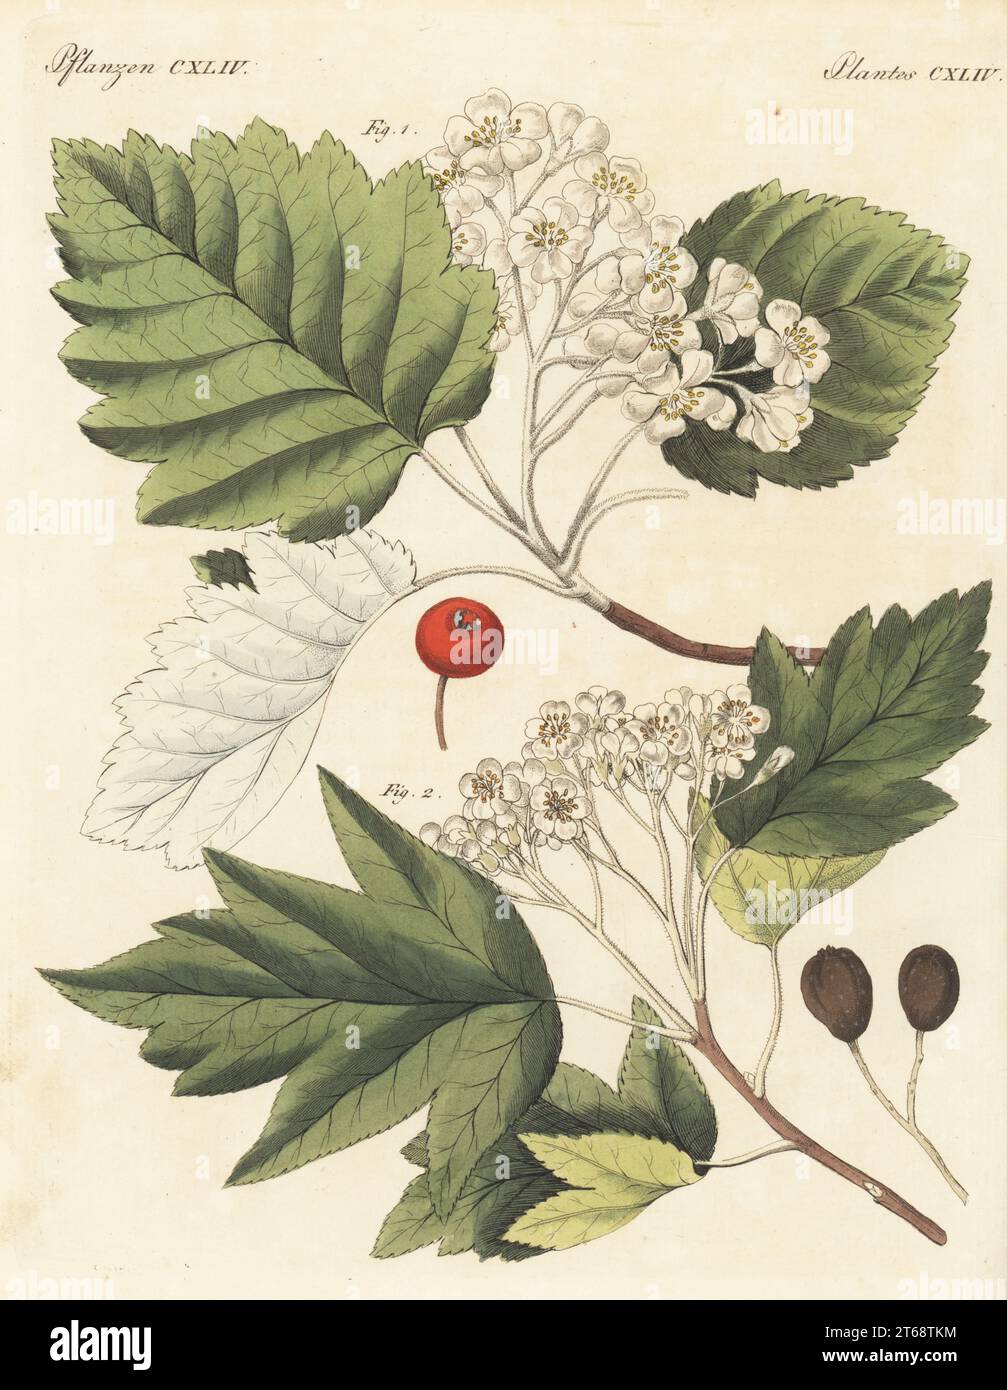 Whitebeam tree, Aria edulis 1 and wild service tree, chequers, and checker tree, Sorbus torminalis 2. Branch with blossom, flower, leaf, fruit and seed. The botanicals were drawn by Henriette and Conrad Westermayr, F. Götz and C. Ermer. Handcoloured copperplate engraving from Carl Bertuch's Bilderbuch fur Kinder (Picture Book for Children), Weimar, 1813. A 12-volume encyclopedia for children illustrated with almost 1,200 engraved plates on natural history, science, costume, mythology, etc., published from 1790-1830. Stock Photo